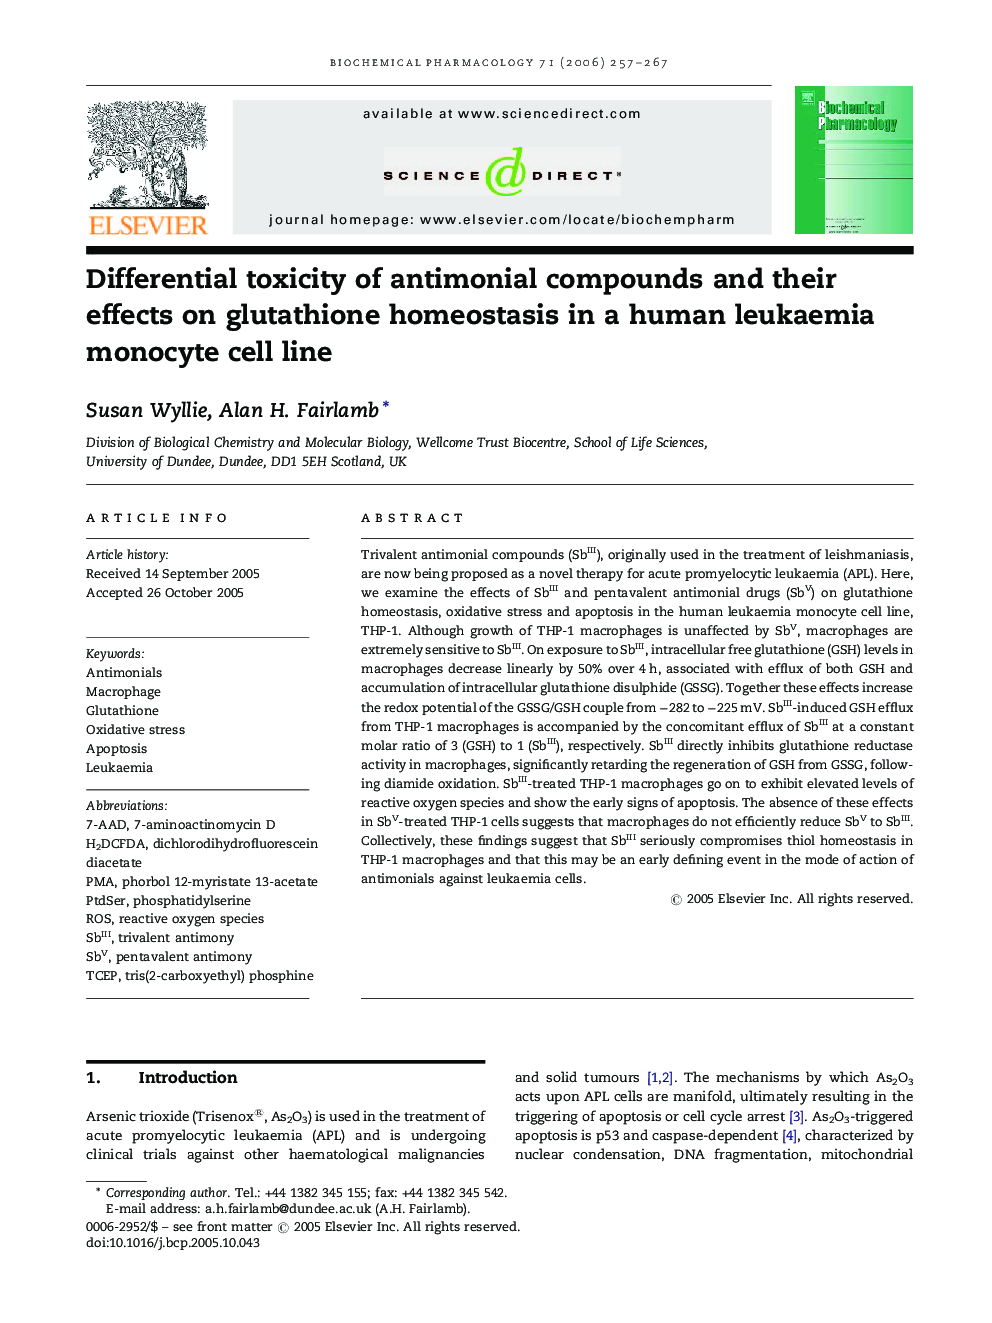 Differential toxicity of antimonial compounds and their effects on glutathione homeostasis in a human leukaemia monocyte cell line